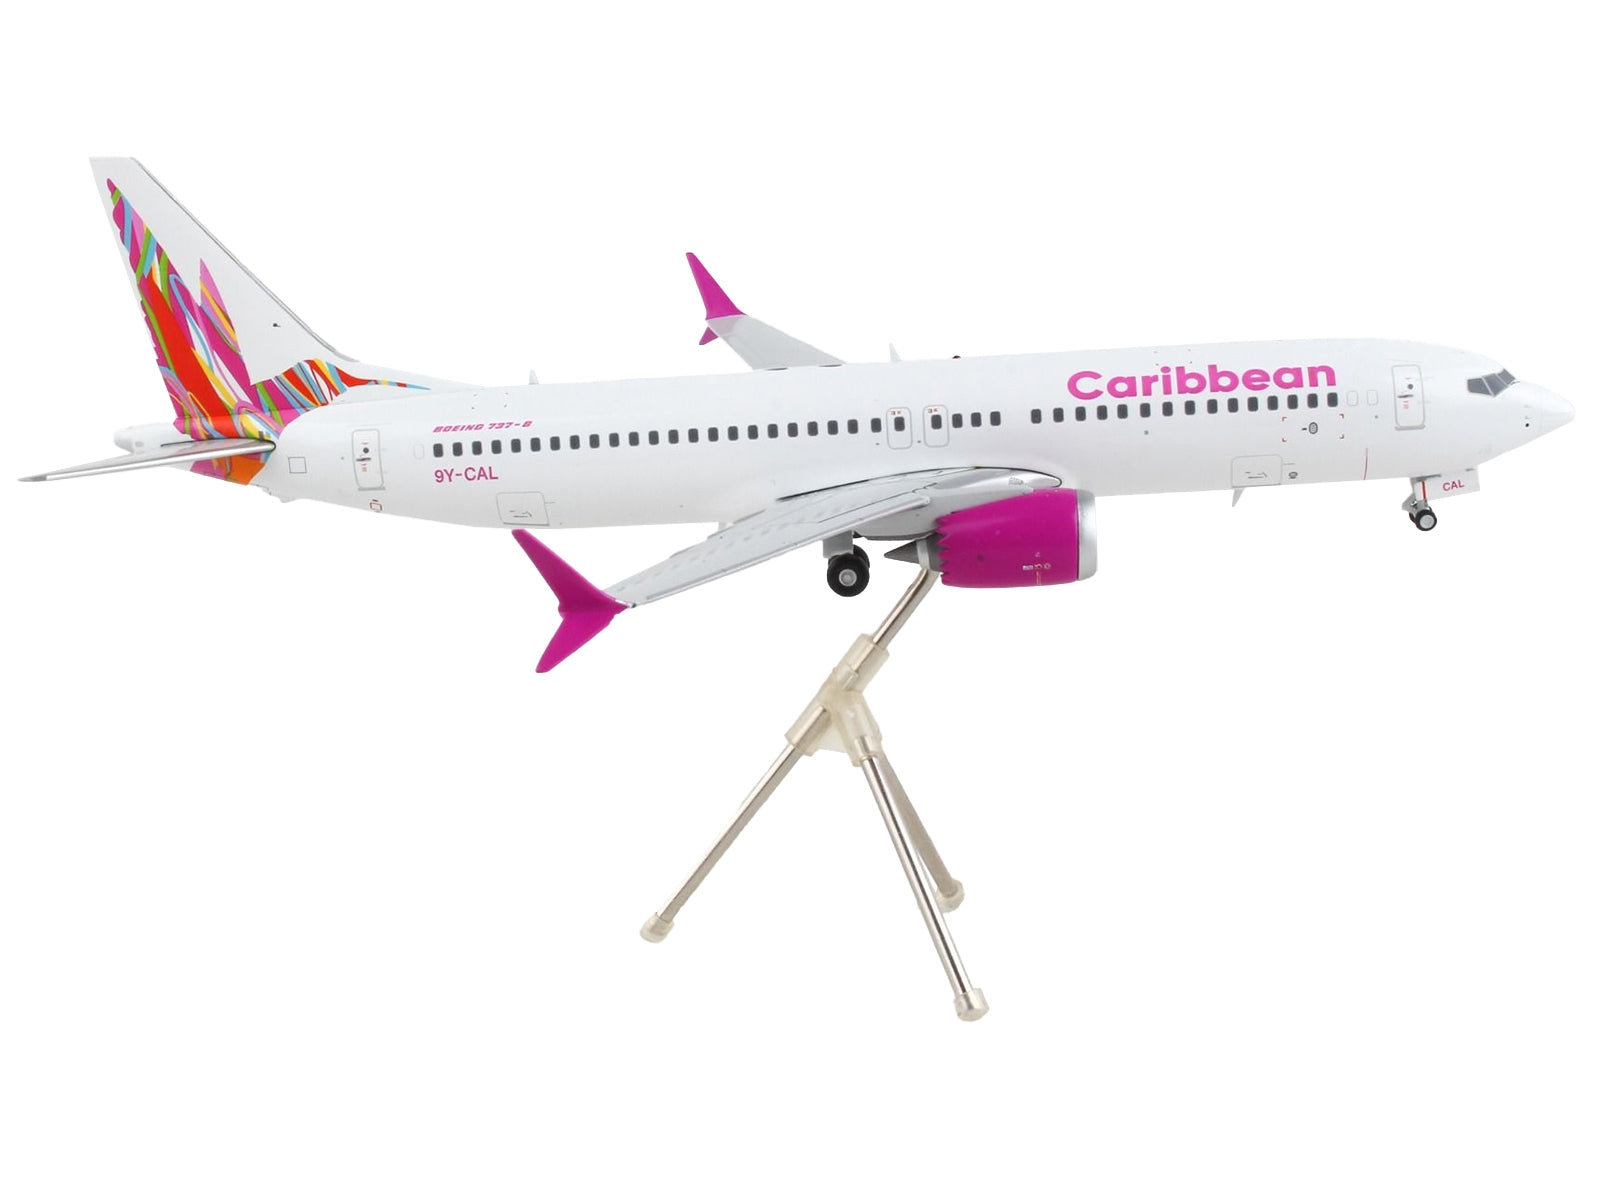 Boeing 737 MAX 8 Commercial Aircraft "Caribbean Airlines" White with Pink Tail "Gemini 200" Series 1/200 Diecast Model Airplane by GeminiJets